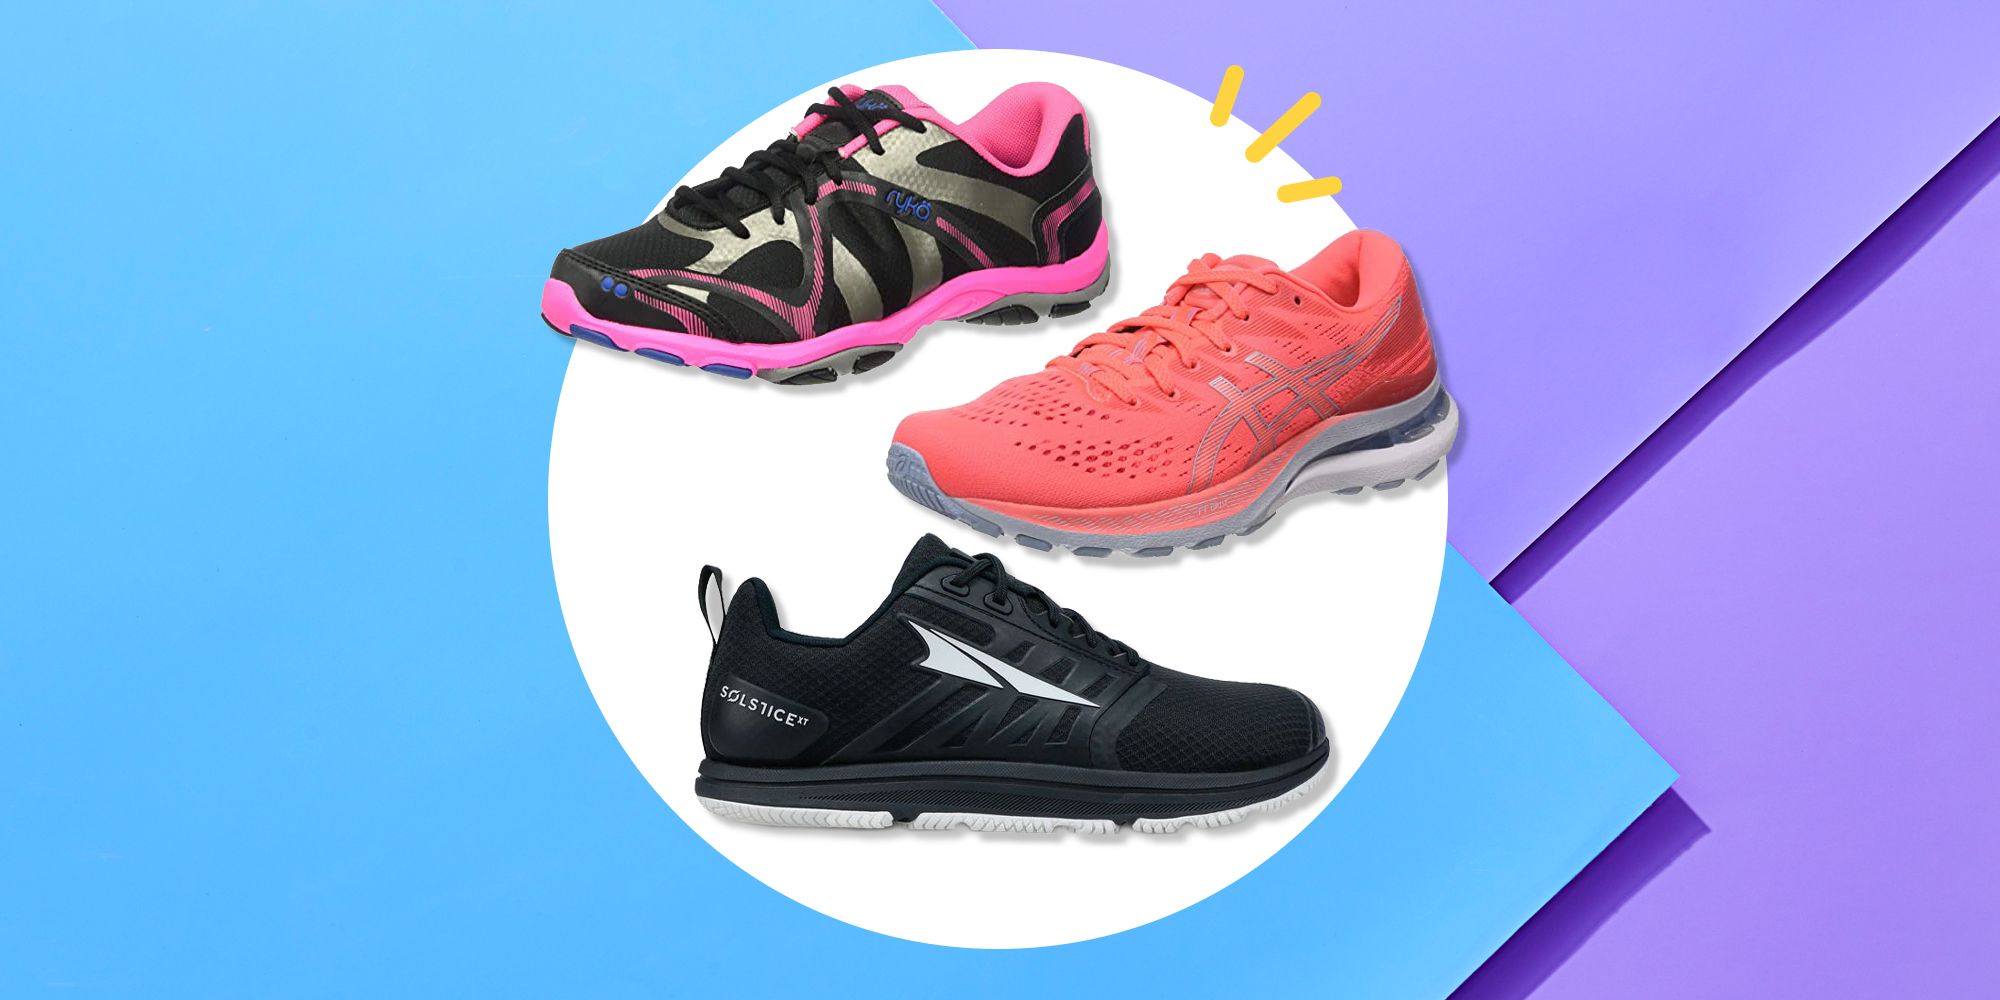 New Ladies Running Shoes Women Gym Trainers Walking Fitness Sports LightWeight 